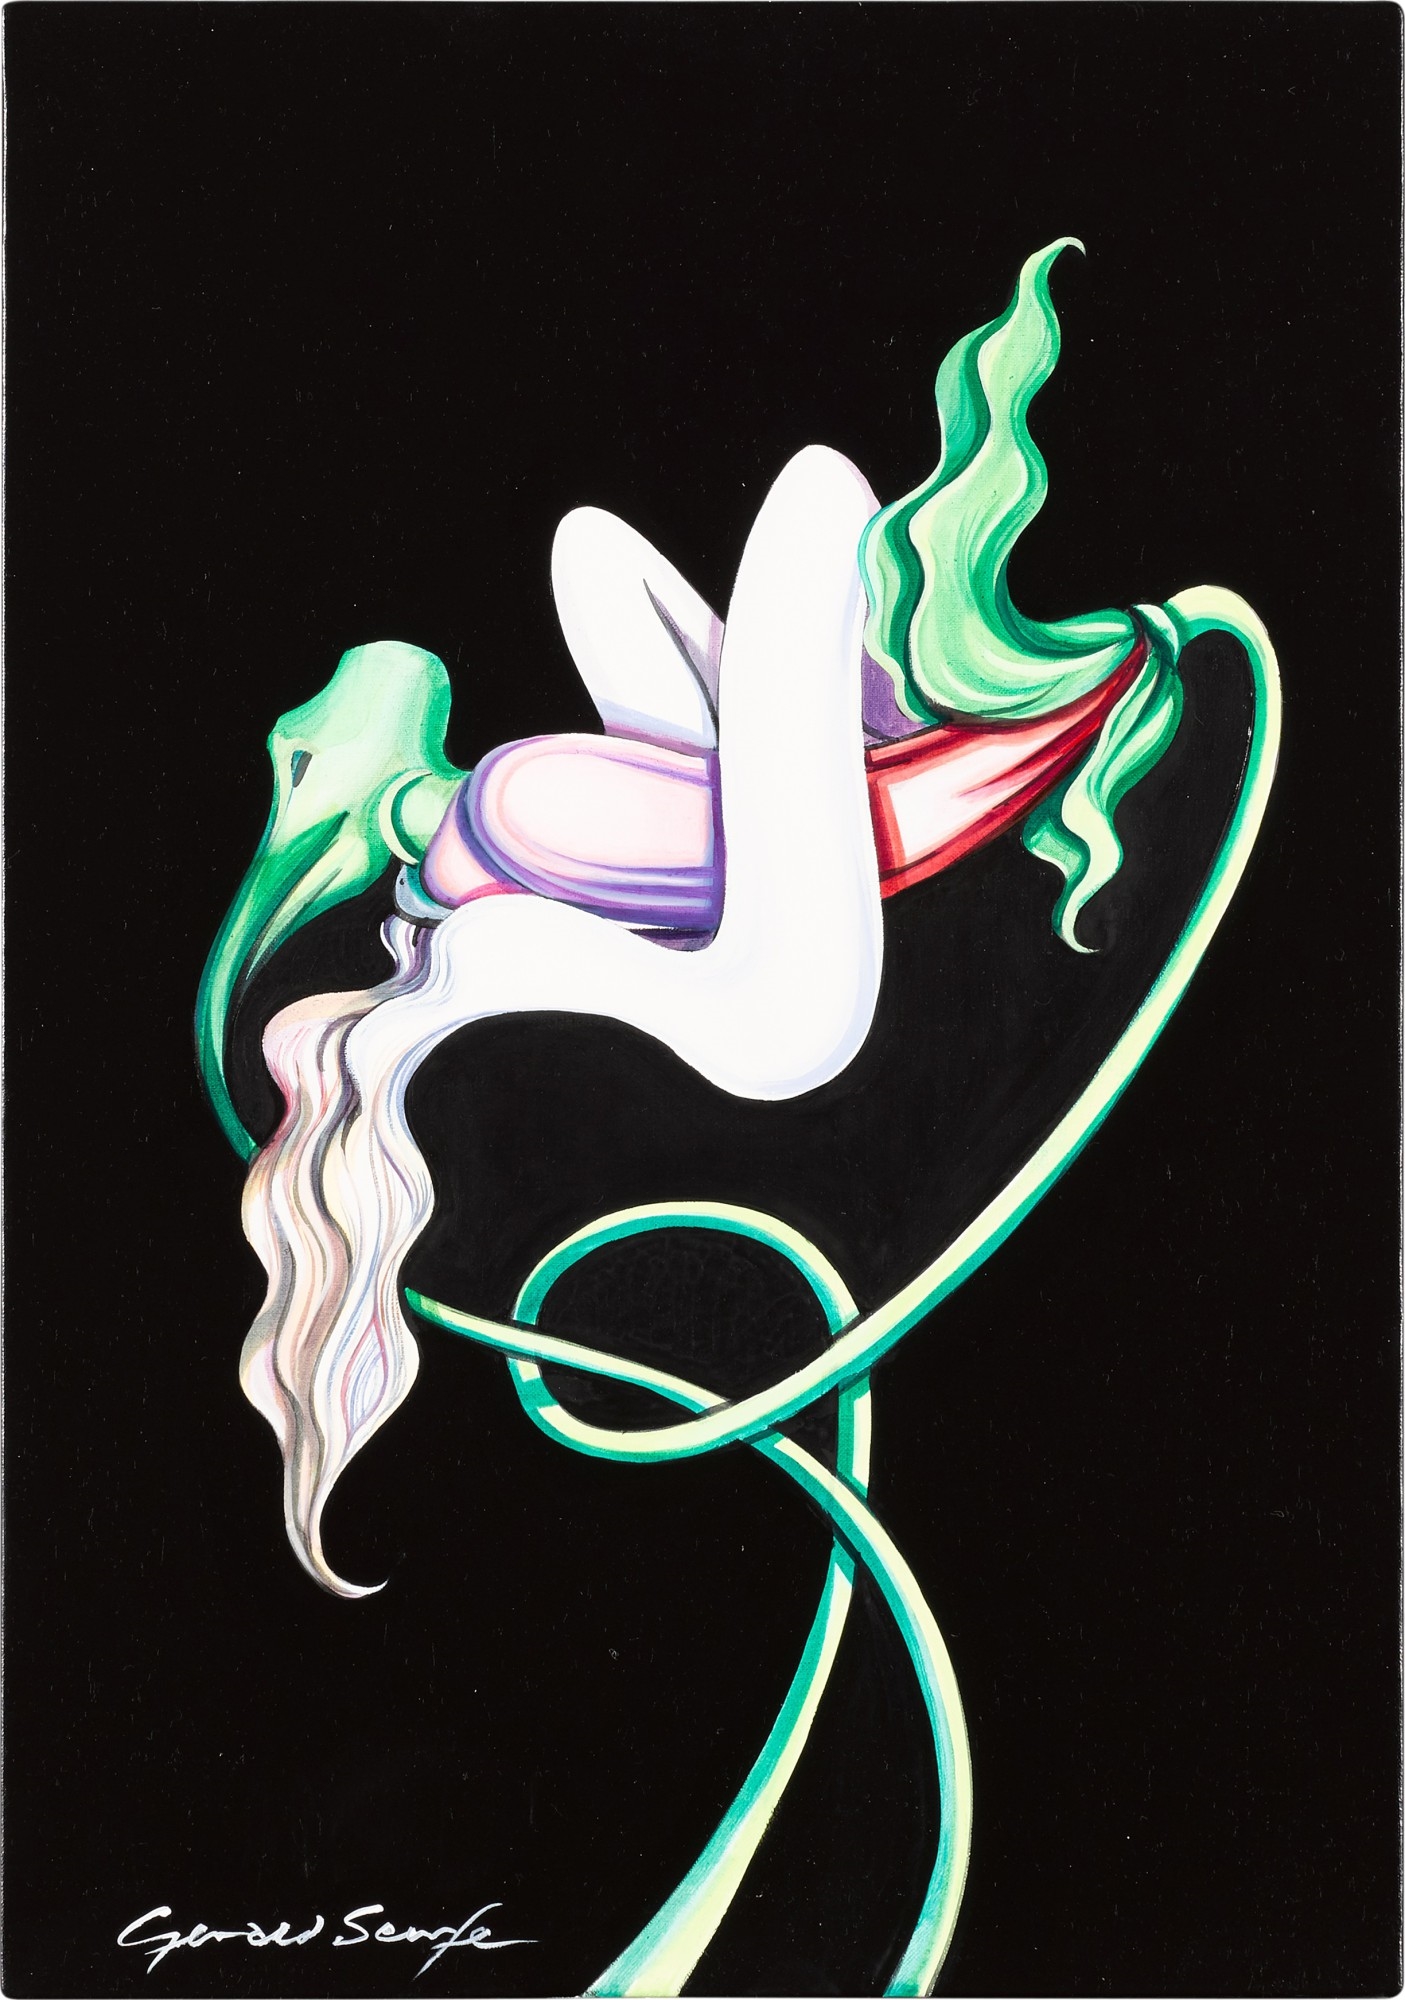 Artwork by Gerald Scarfe, Flowers, Made of oil on canvas